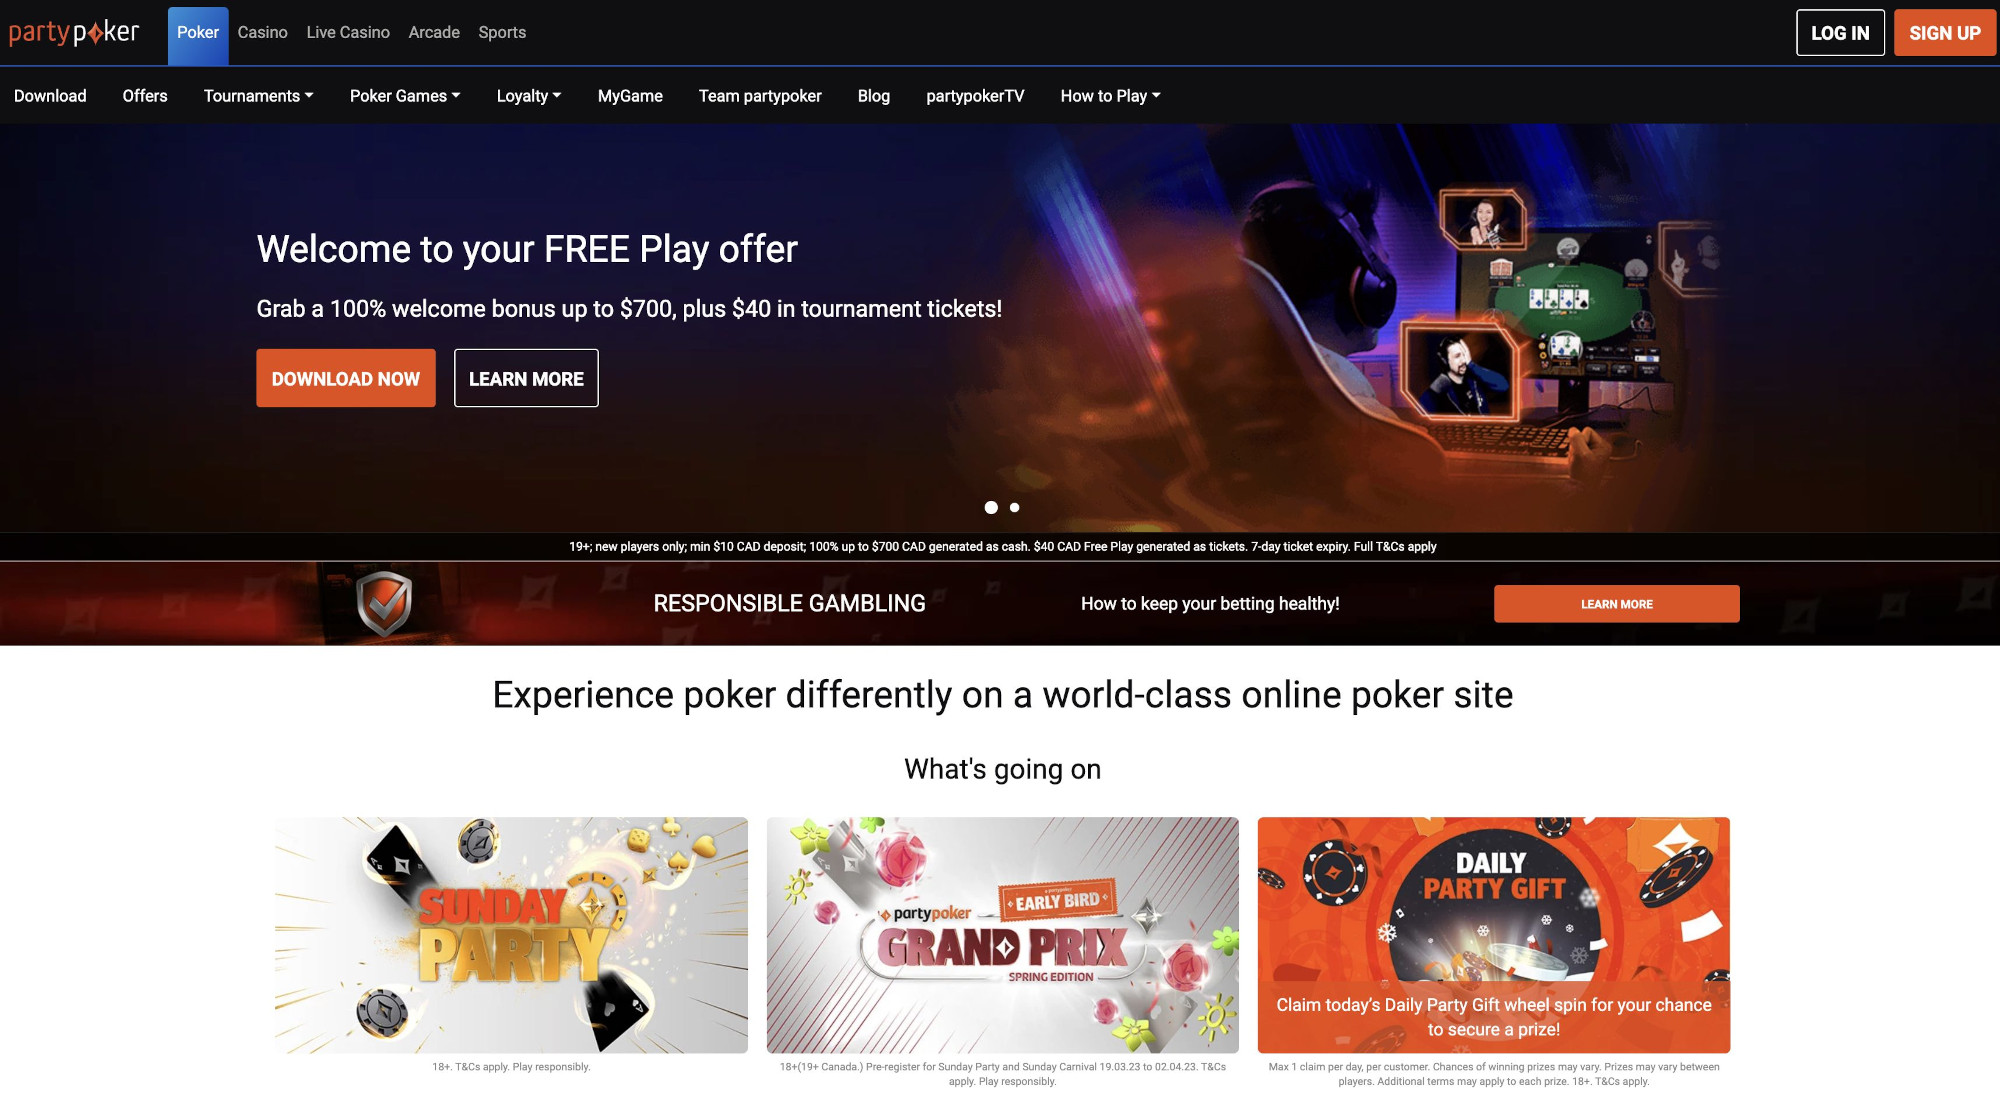 The Best Five Poker Tournaments Under $5 on partypoker